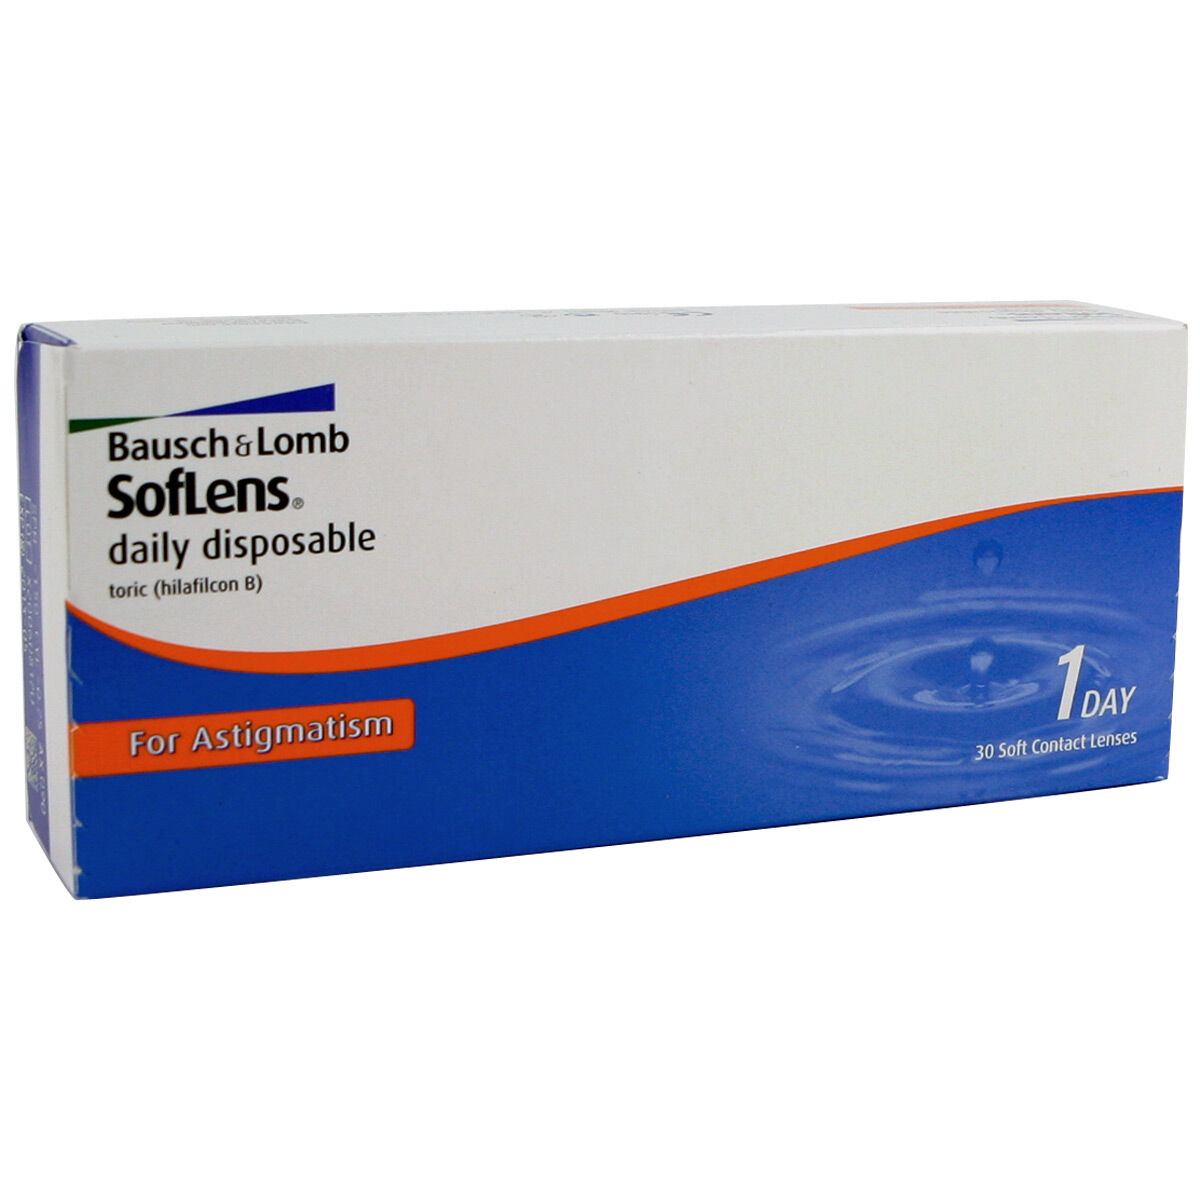 Bausch & Lomb Soflens Daily Disposable Toric (30 Contact Lenses), Bausch & Lomb Daily Toric Lenses, Hilafilcon B